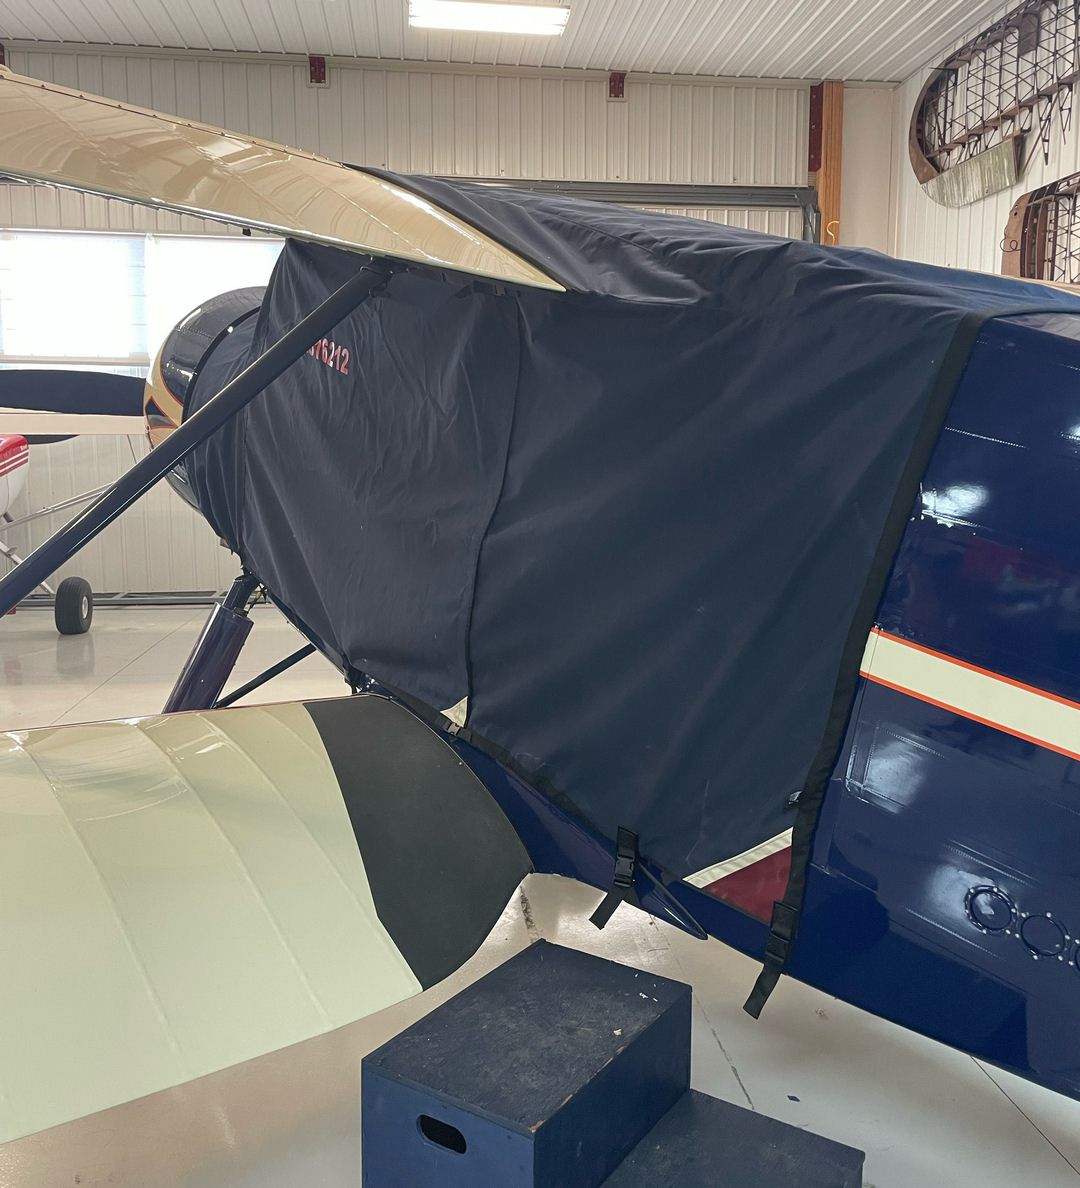 Waco YQC-6 Canopy Cover, over-top type